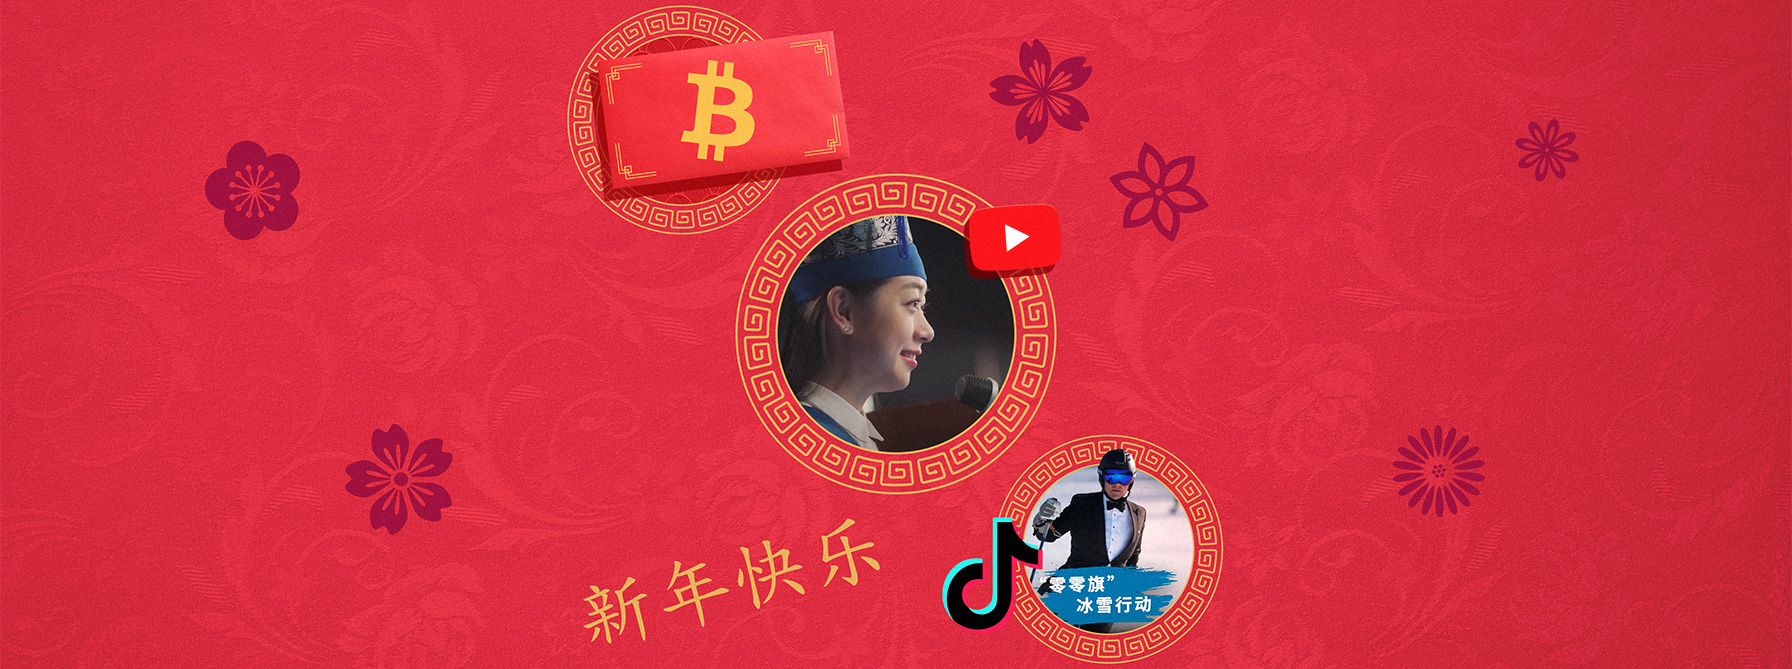 Chinese New Year - the year of the finance brand